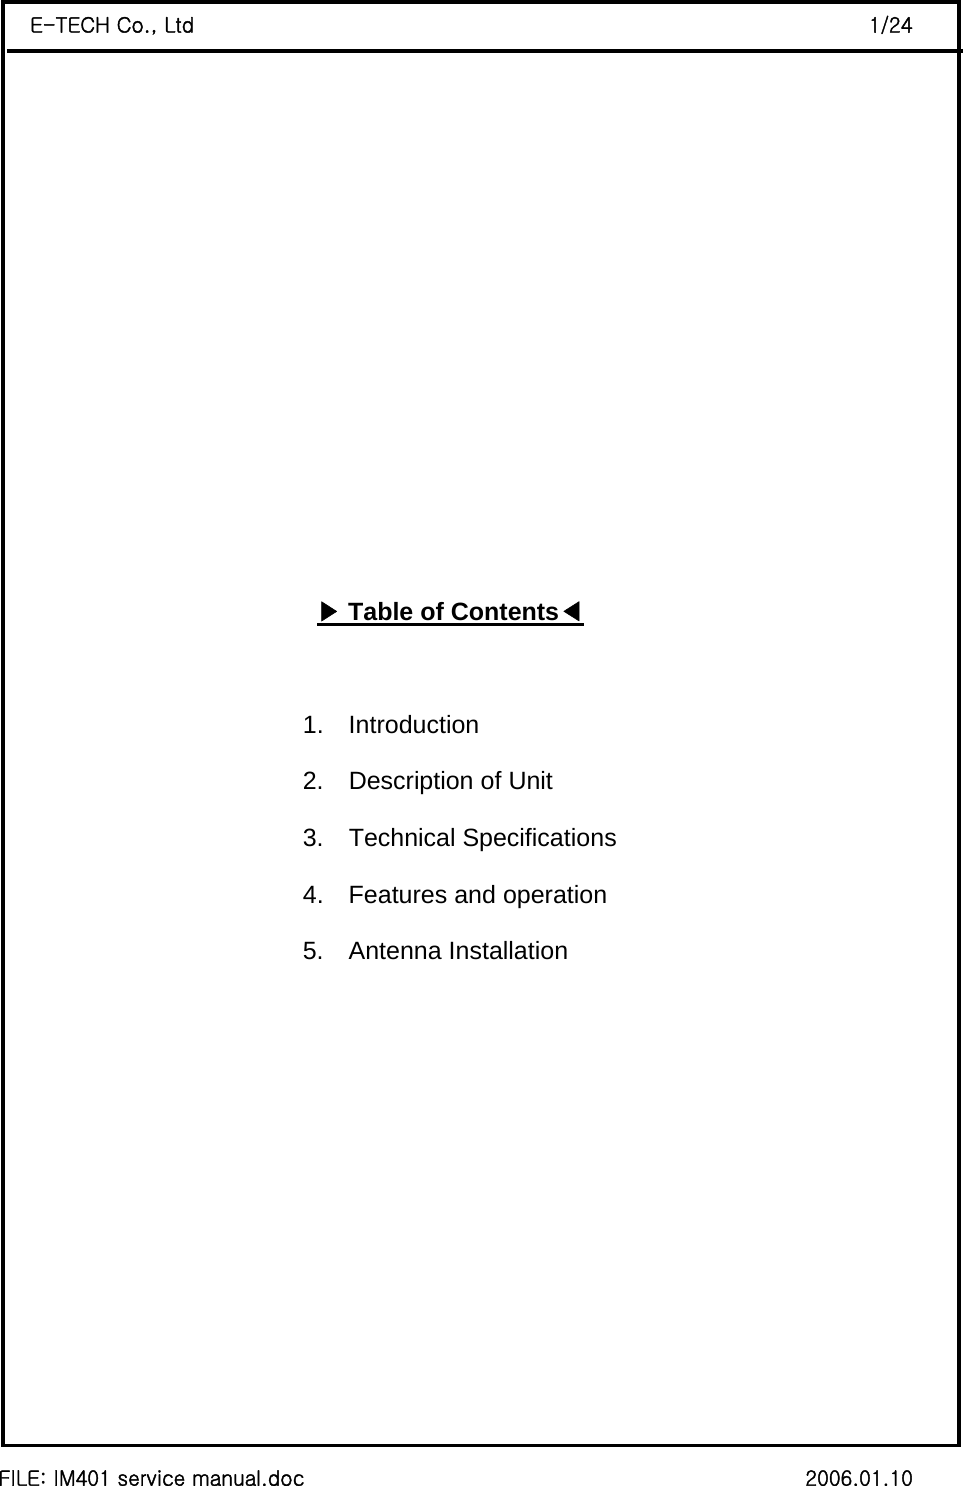  FILE: IM401 service manual.doc                                                 2006.01.10 E-TECH Co., Ltd                                                                  1/24    ▶Table of Contents◀                            1.  Introduction                           2.  Description of Unit                           3.  Technical Specifications                           4.  Features and operation 5.  Antenna Installation         